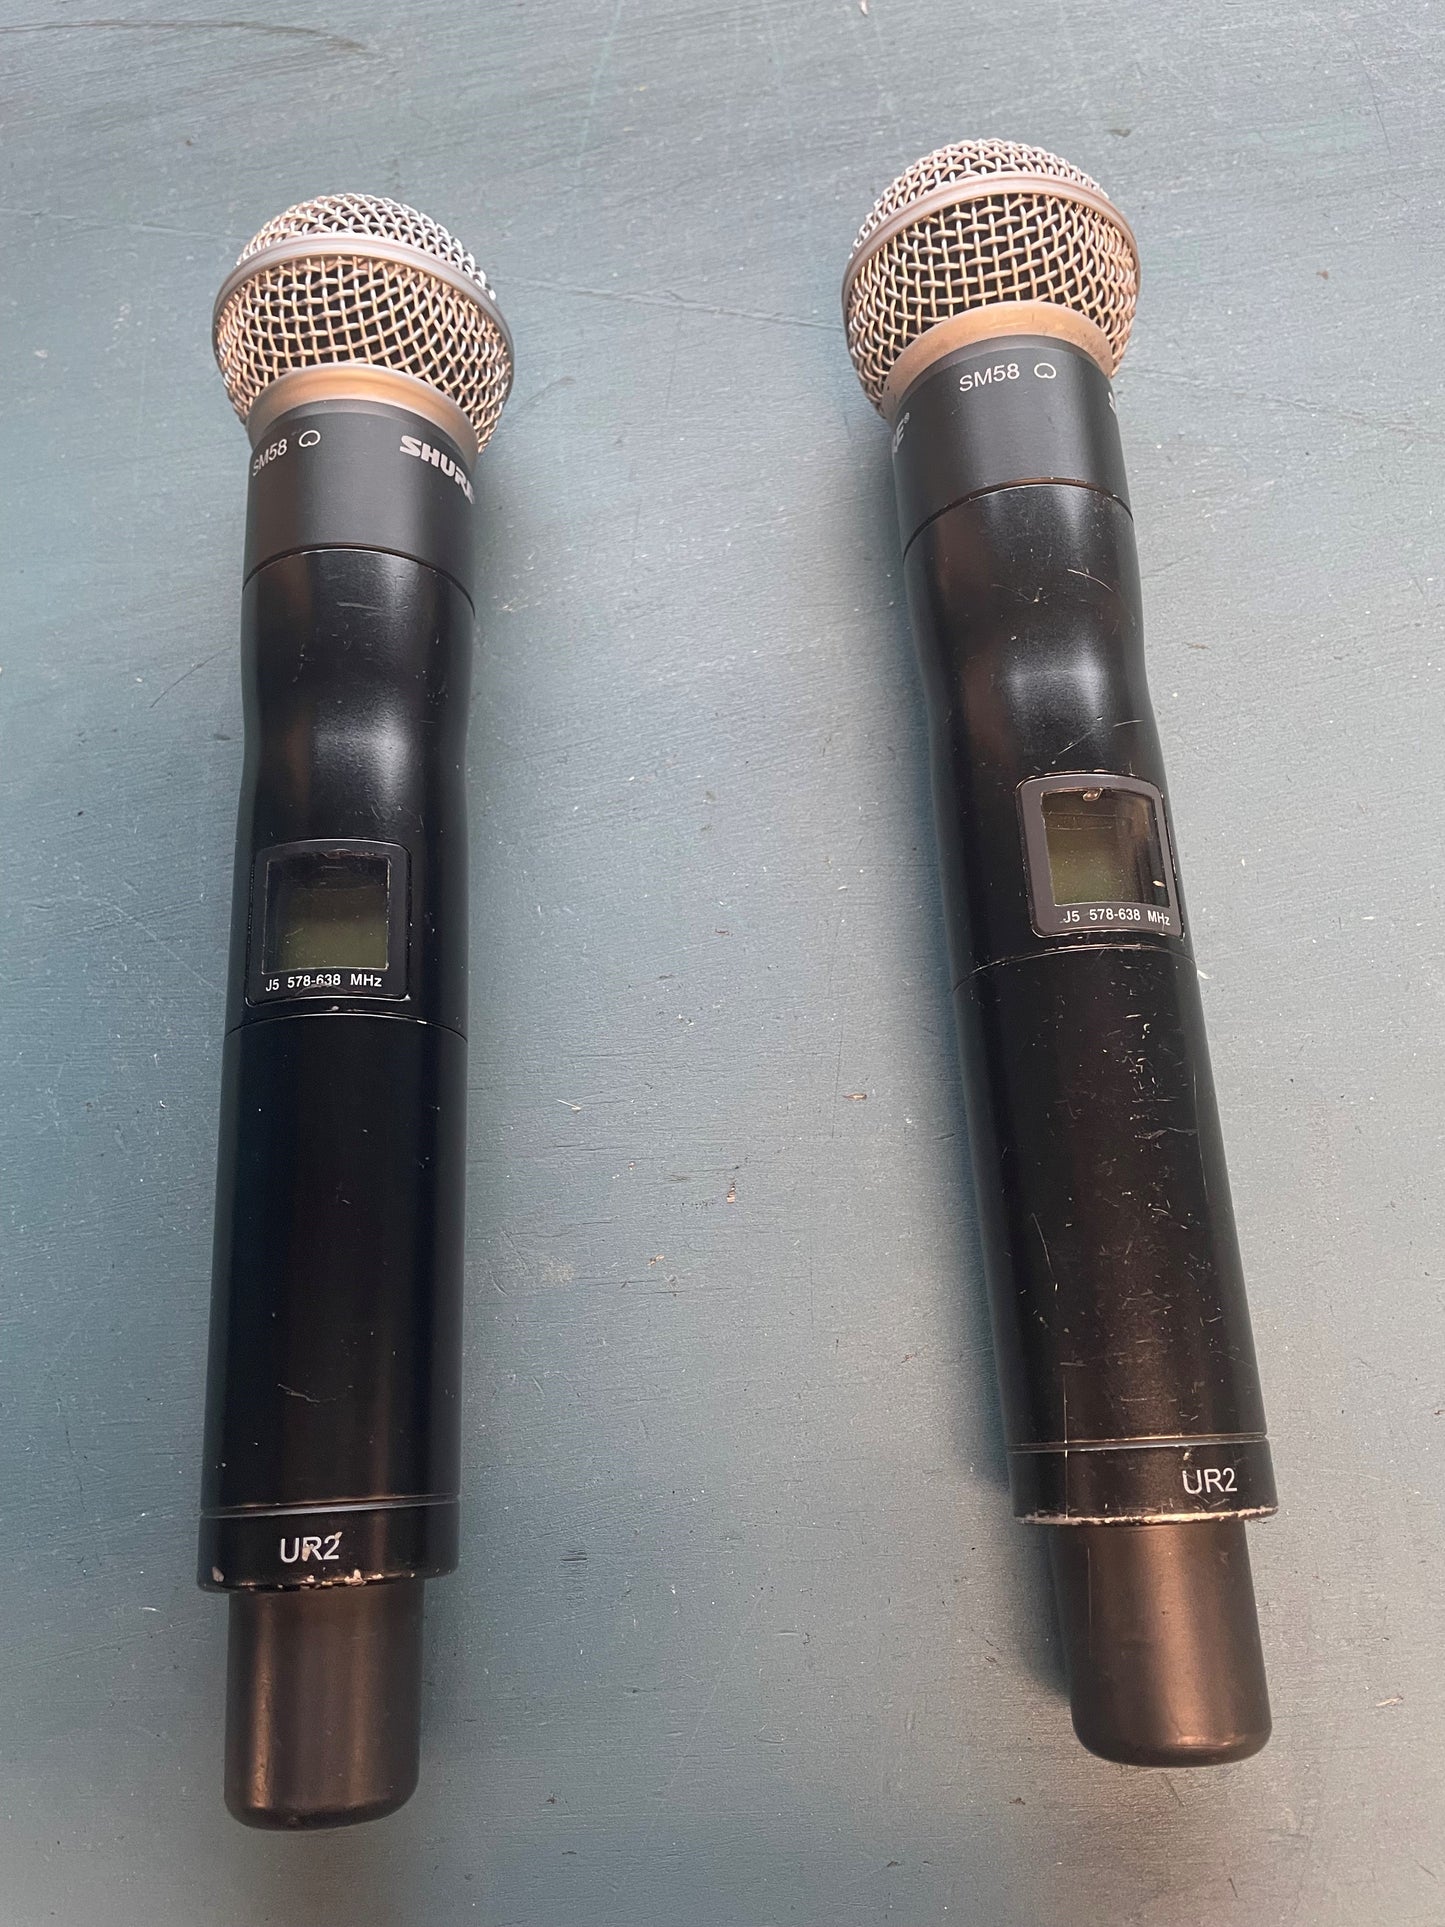 Used Shure UR4D-J5 Package (2x UR2) (2x UR1) for Sale. We Sell Professional Audio Equipment. Audio Systems, Amplifiers, Consoles, Mixers, Electronics, Entertainment, Sound, Live.